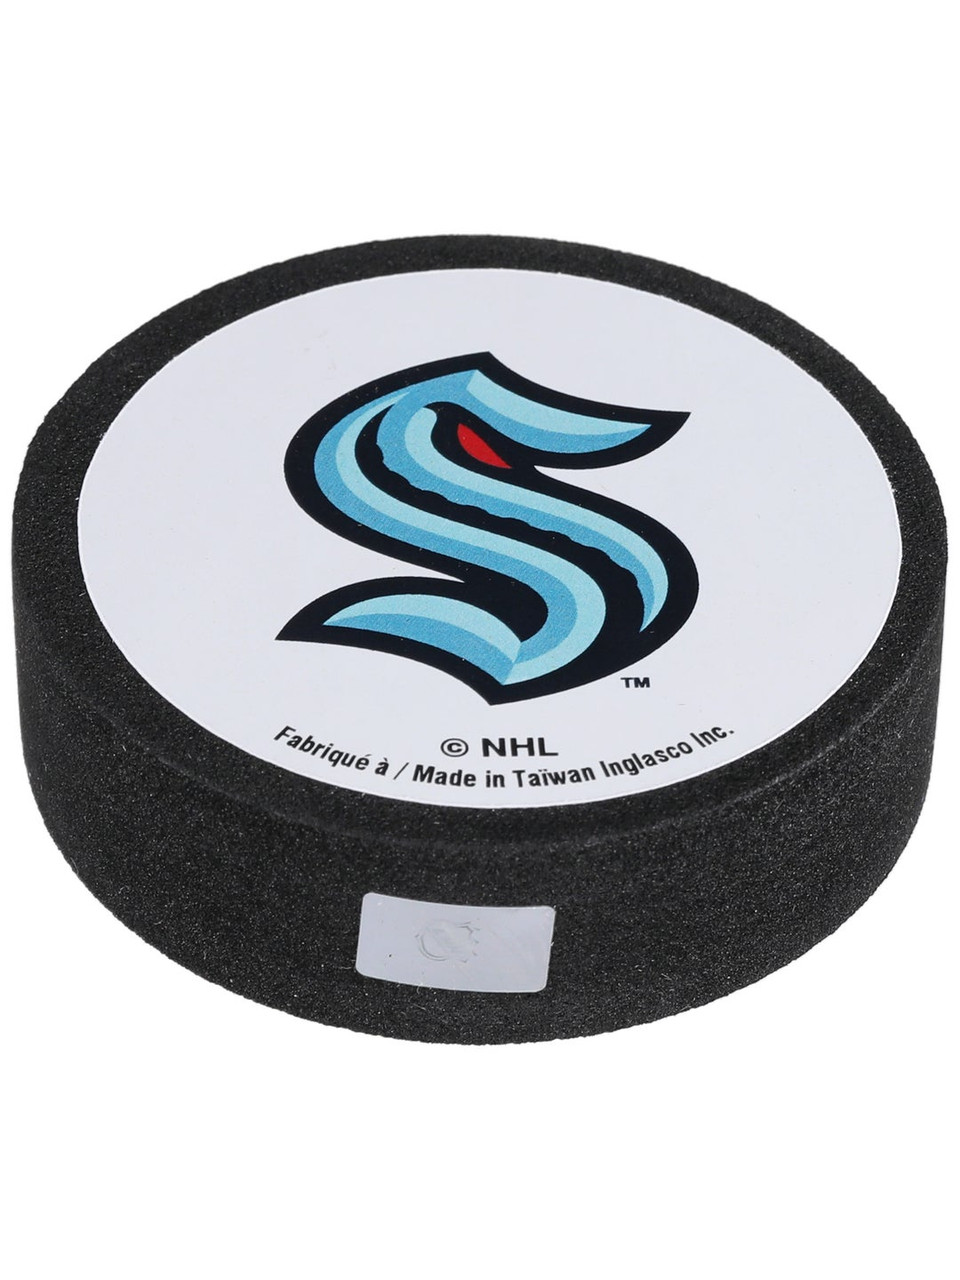 Columbus Blue Jackets Inglasco NHL Official Team Hockey Puck In Cube